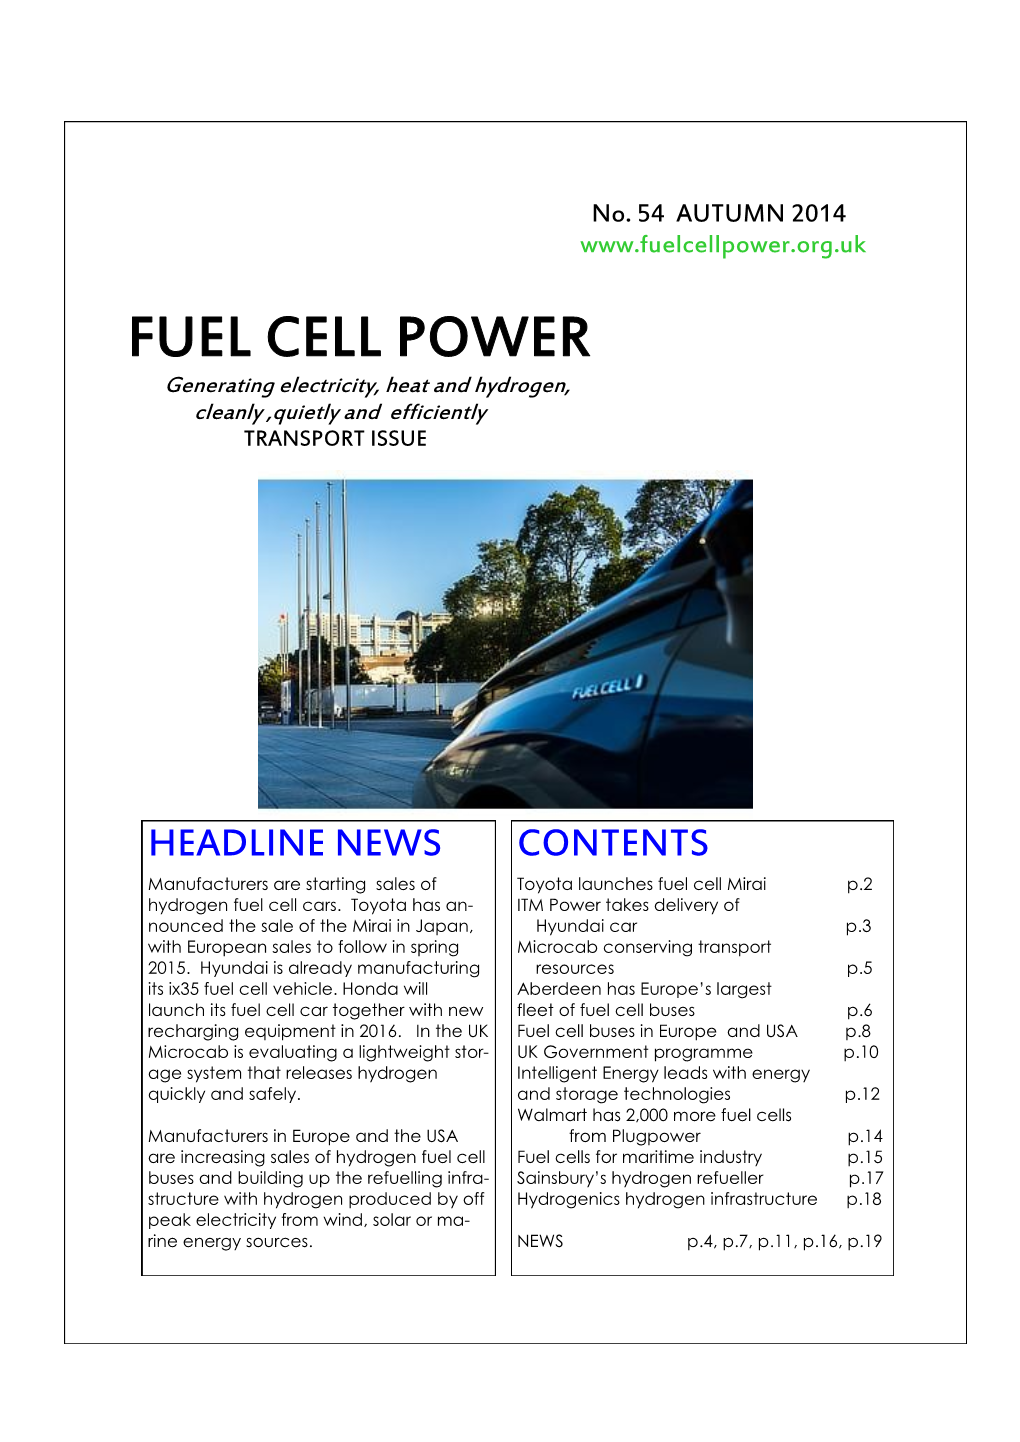 FUEL CELL POWER Generating Electricity, Heat and Hydrogen, Cleanly ,Quietly and Efficiently TRANSPORT ISSUE